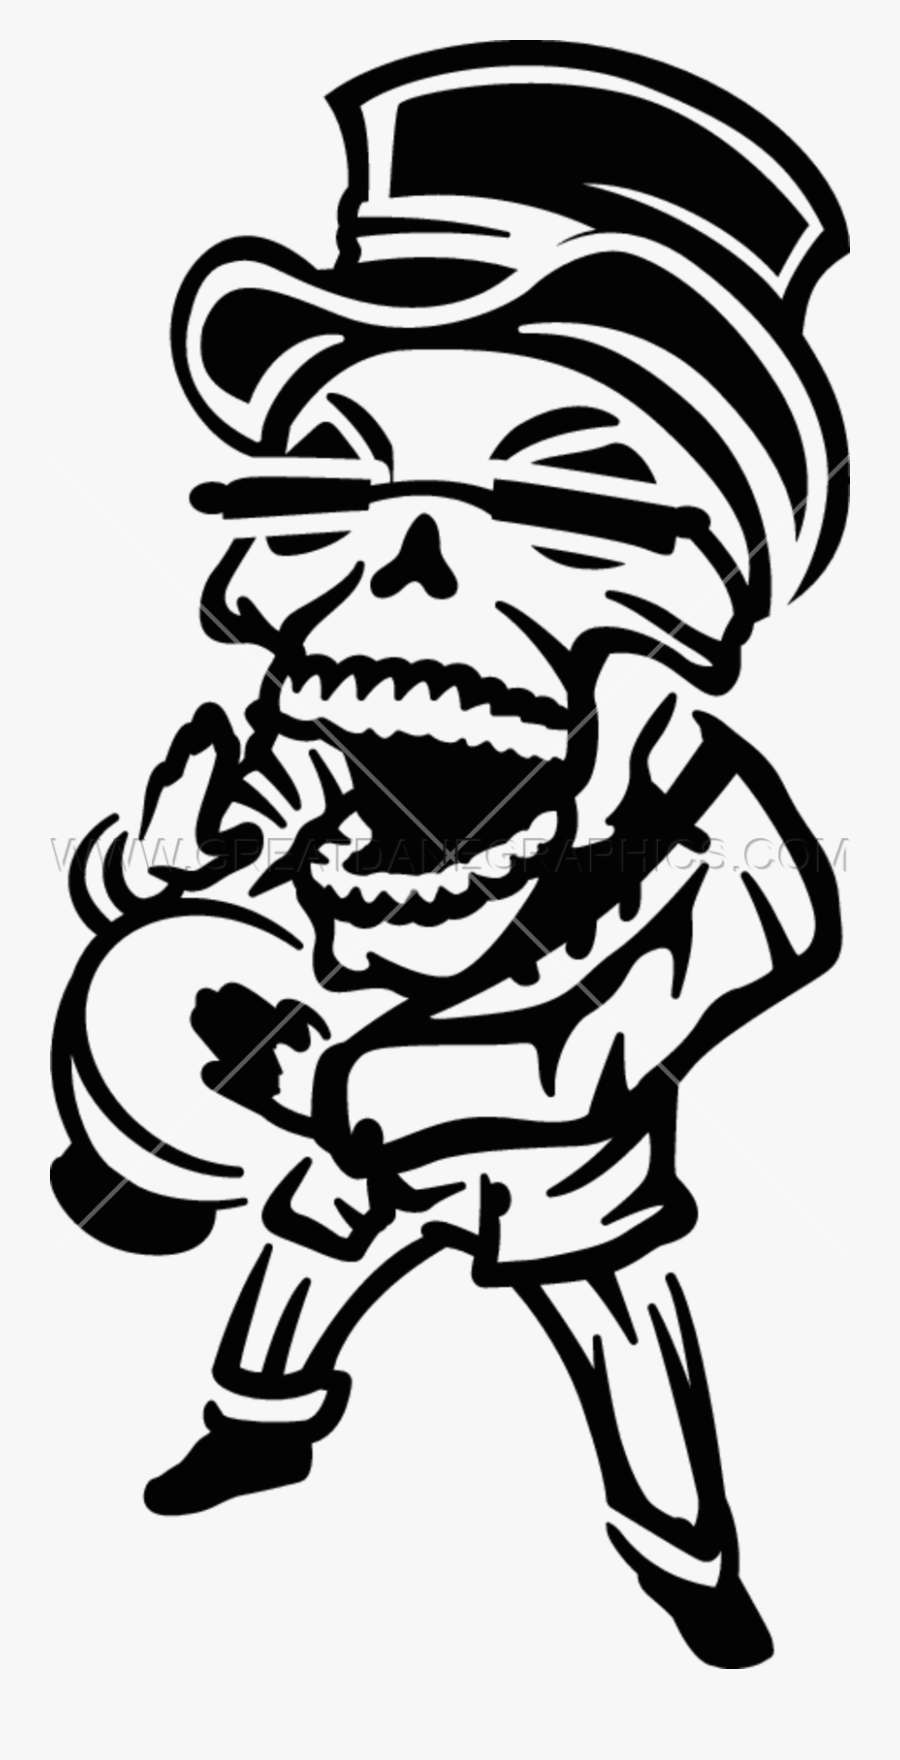 Transparent Shaman Clipart - Voodoo Characters Black And White, Transparent Clipart